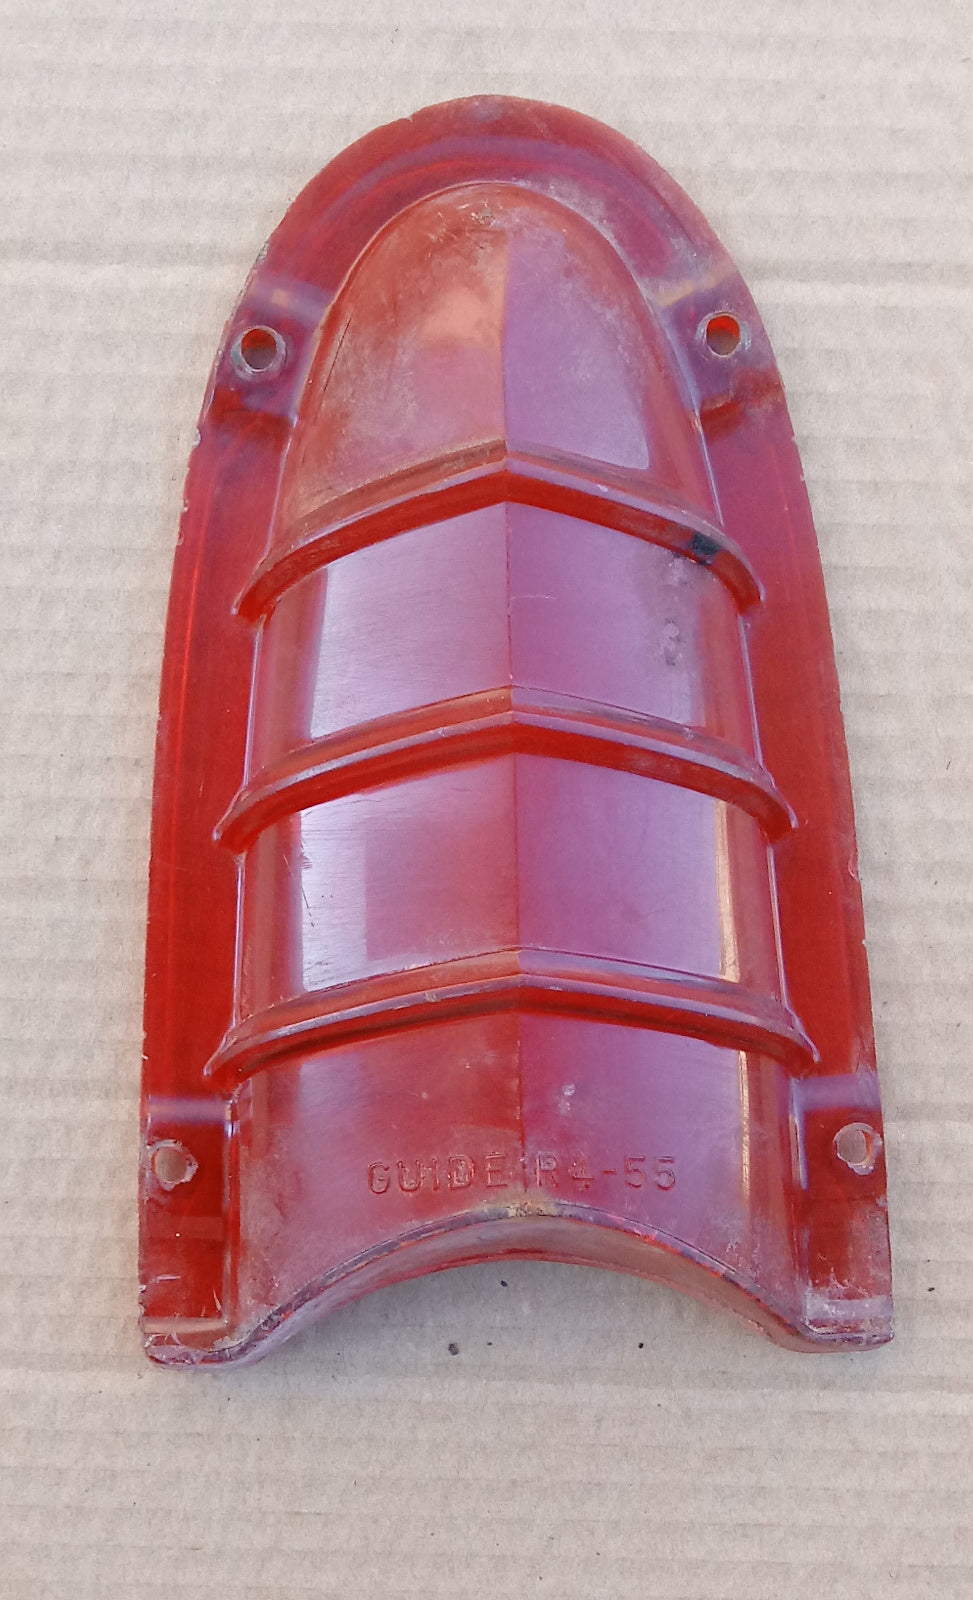 1955 Buick taillight lens